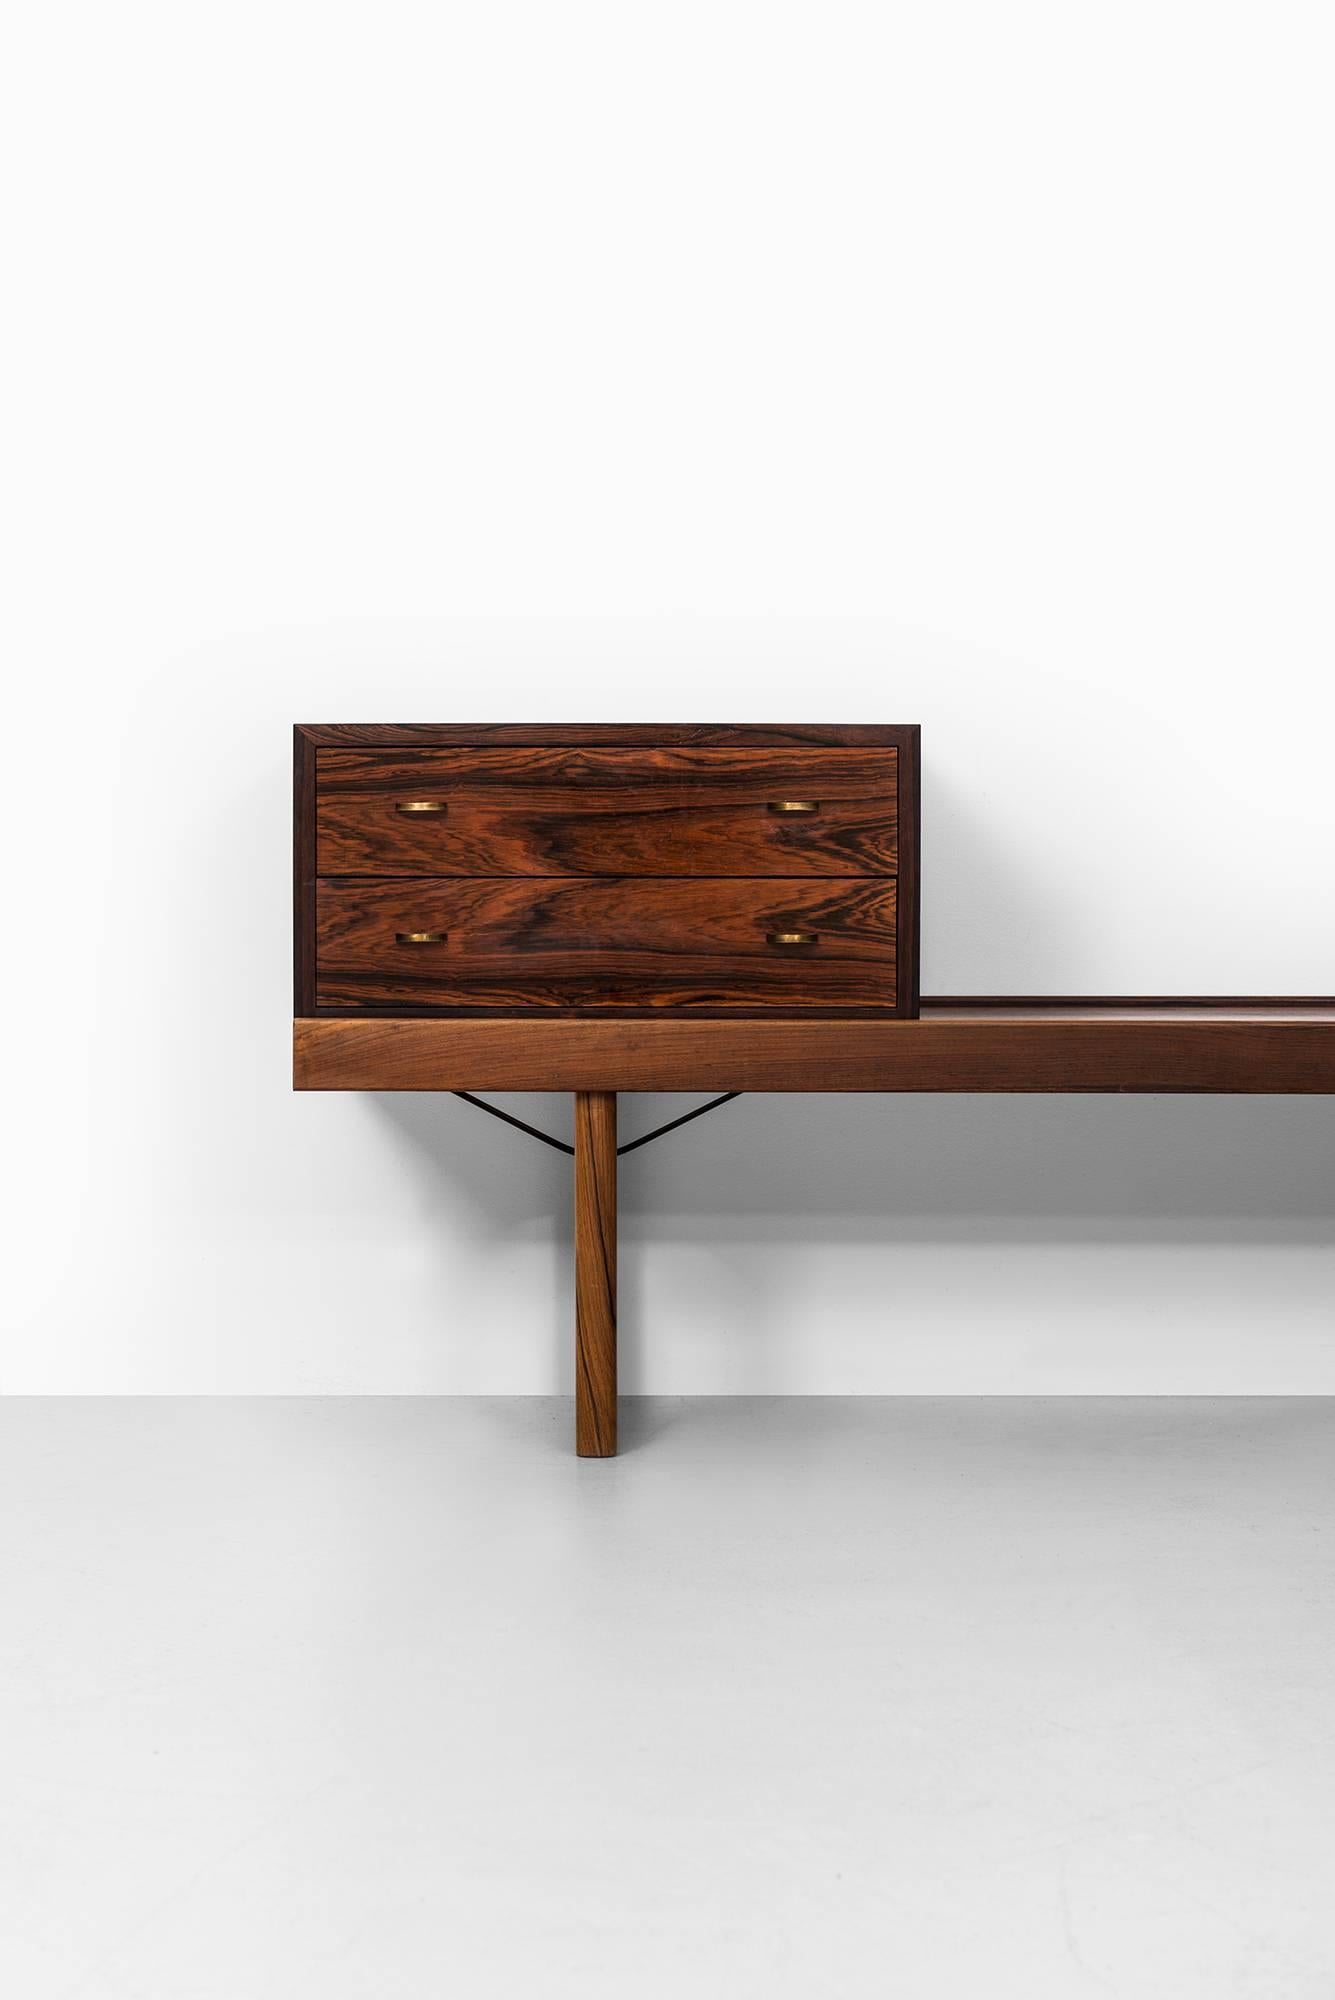 Bench/side table model Krobo with drawer box designed by Torbjørn Afdal. Produced by Bruksbo in Norway.